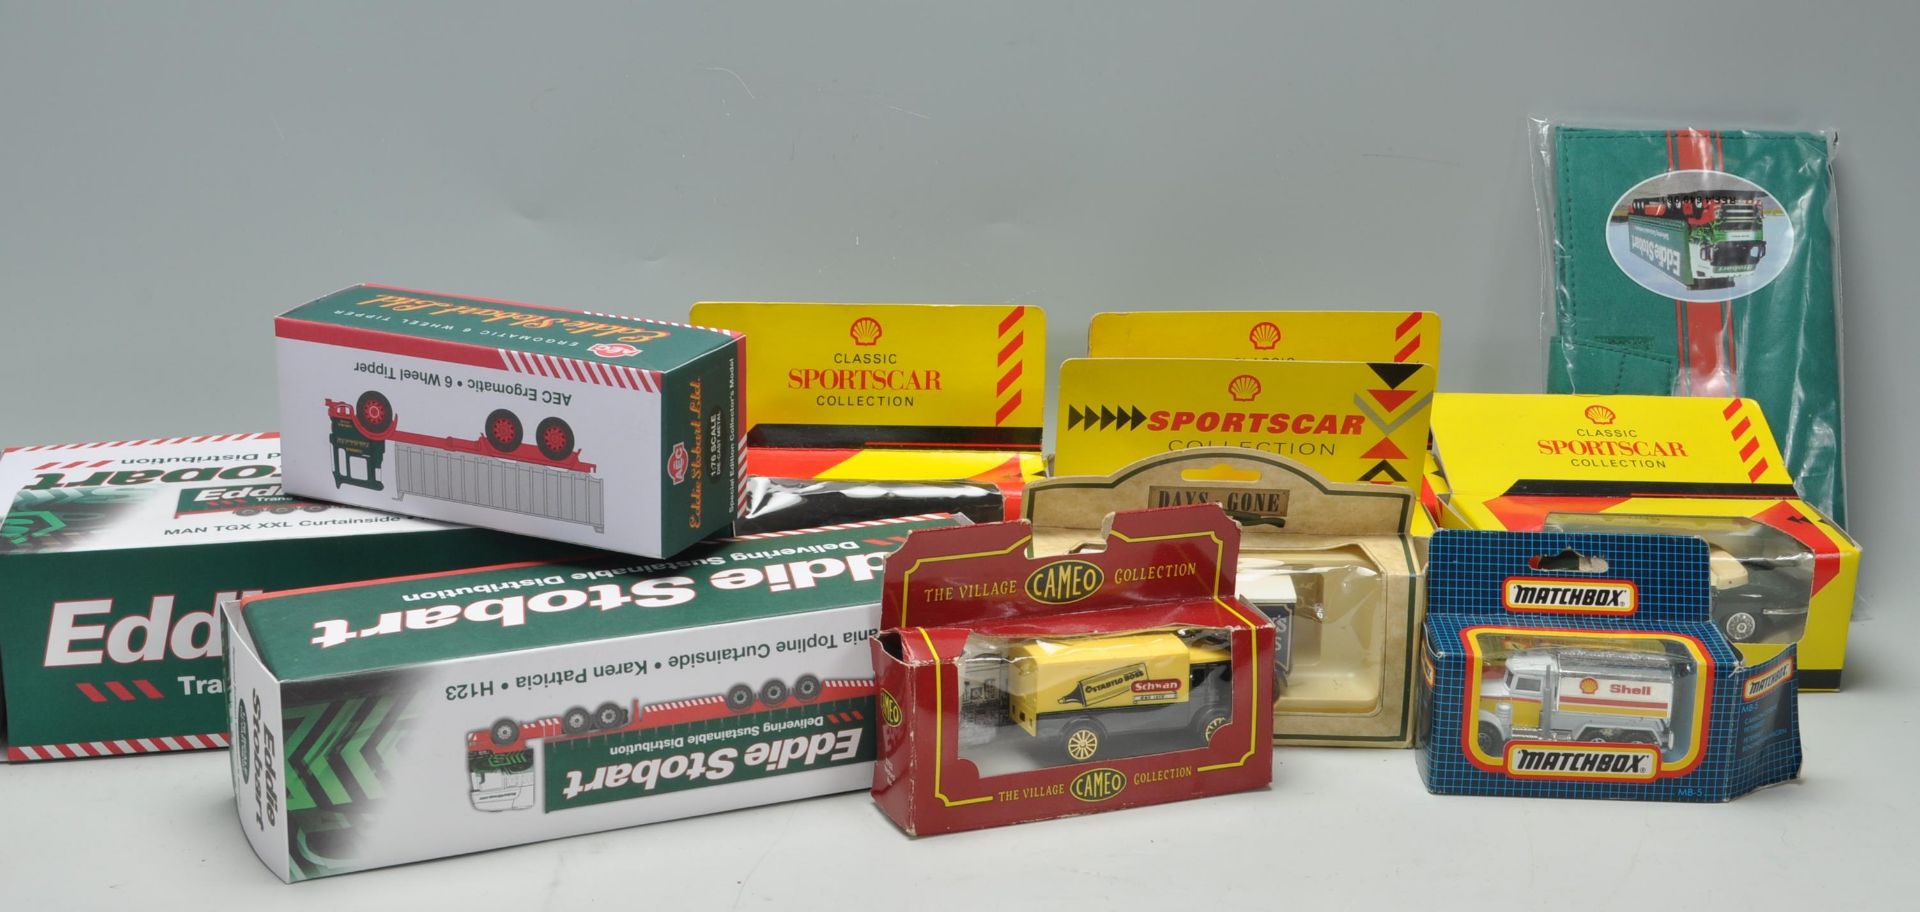 COLLECTION OF VINTAGE 20TH CENTURY DIE CAST MODELS AND EDDIE STOBART RELATED MEMORABILIA